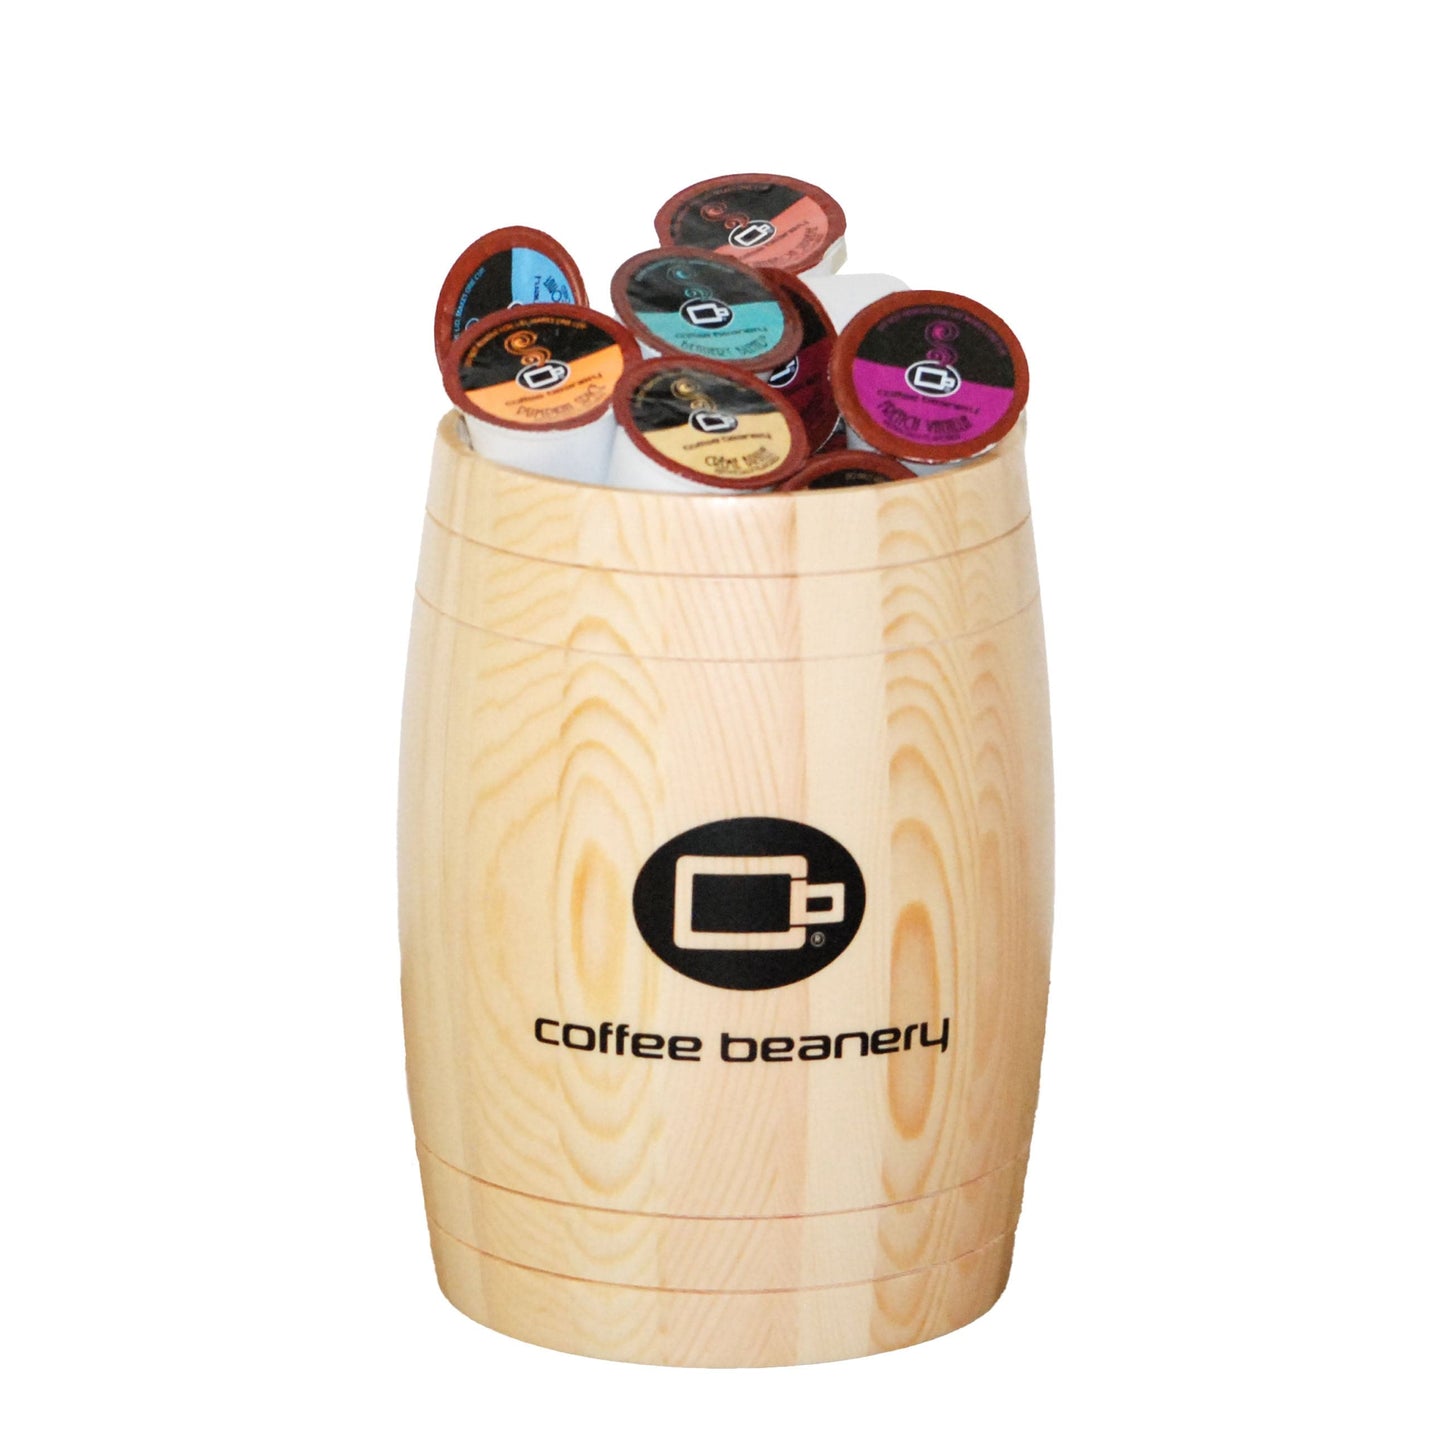 Coffee Beanery Coffee Gift Baskets Barrel of All Coffee Pods Flavors